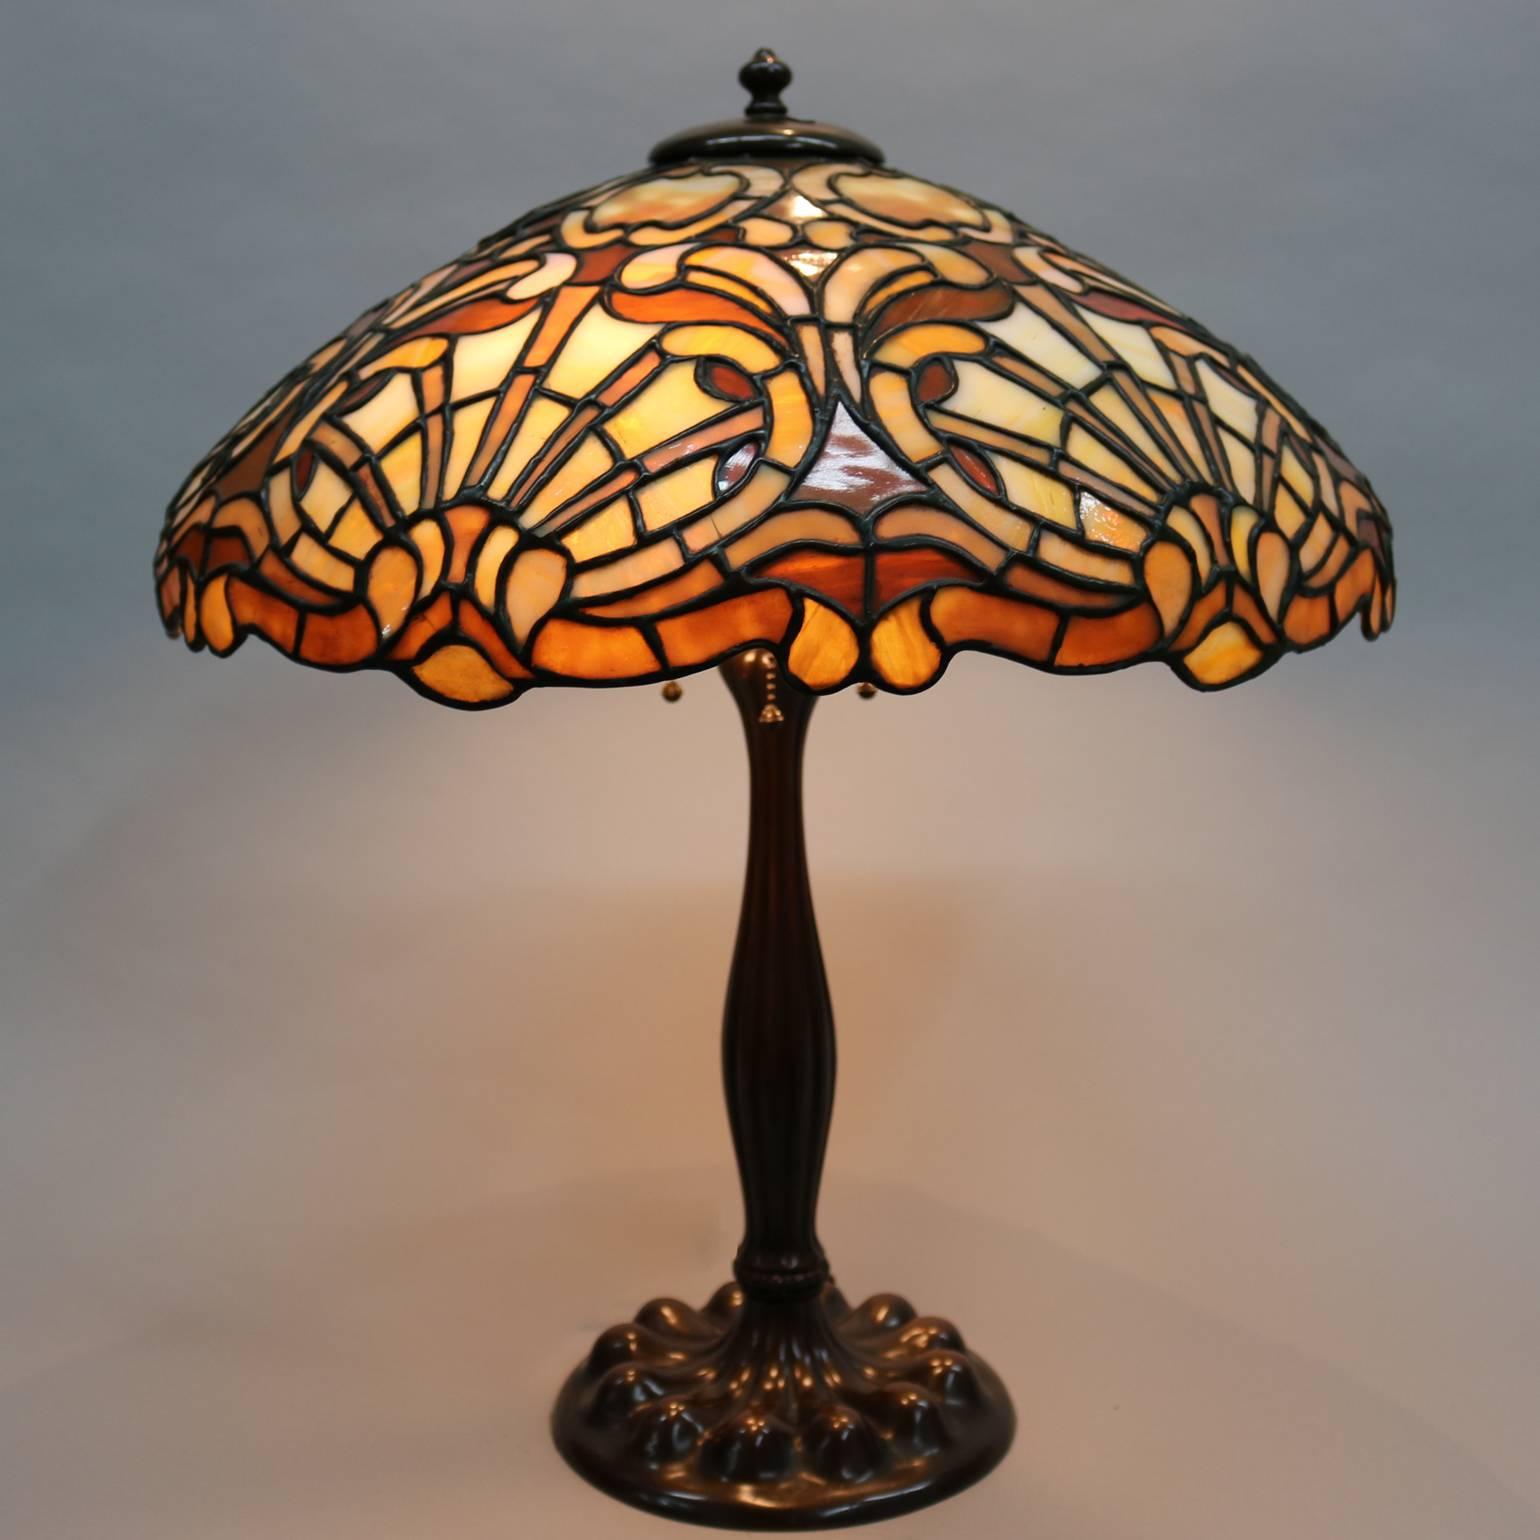 Antique Duffner and Kimberly Art Nouveau mosaic leaded stained glass lamp features a dome shade with caramel shell design, the standard with reeded hour glass form rising to support a two-socket cluster, circa 1911

Measures: 24